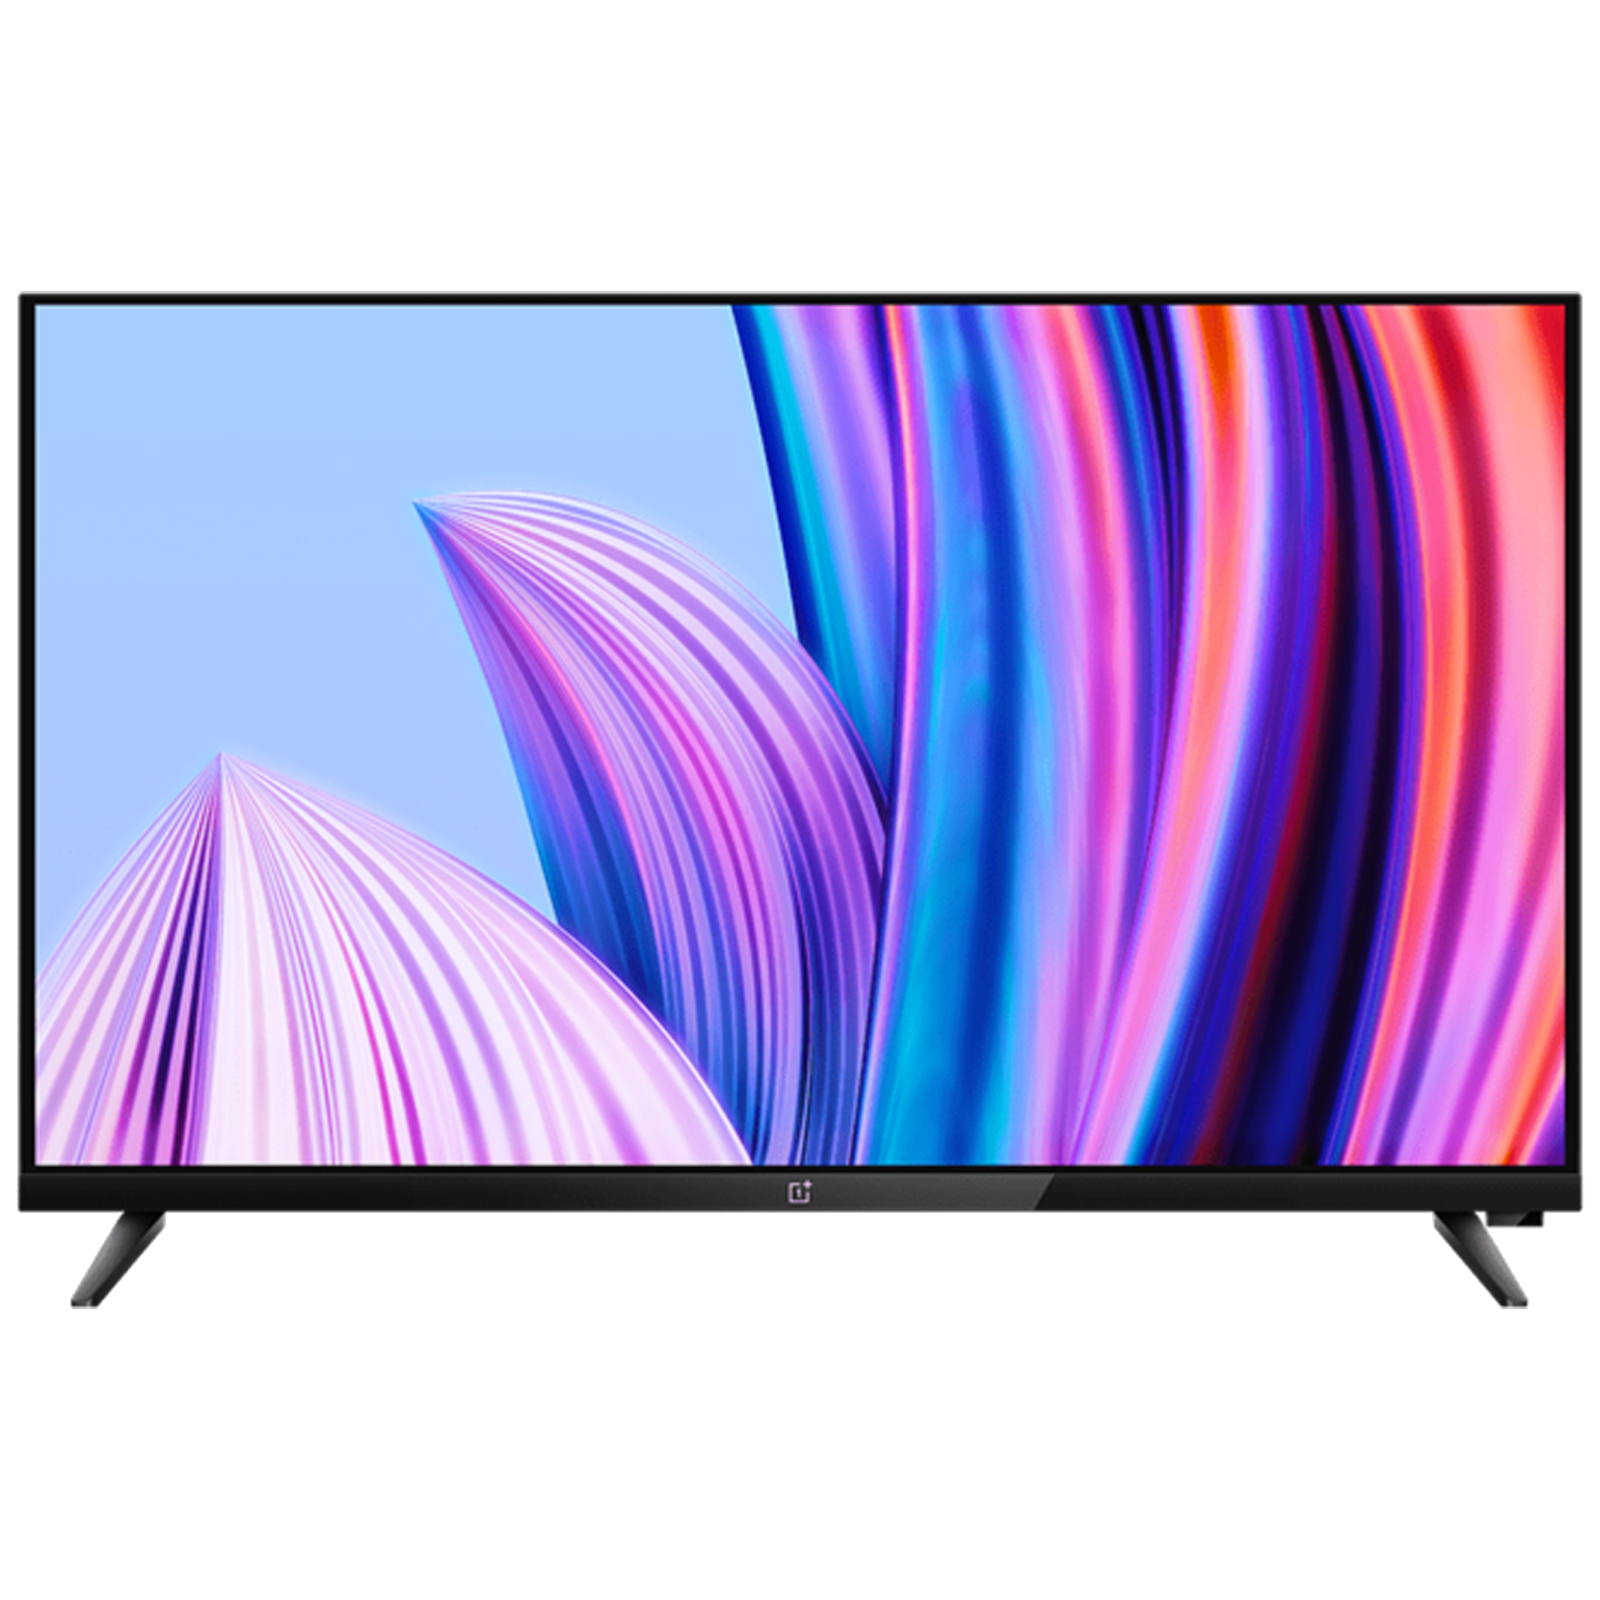 Croma Retail - OnePlus Y Series 80cm (32 Inch) HD Ready LED Android Smart TV (Gamma Engine, 32Y1, Black)